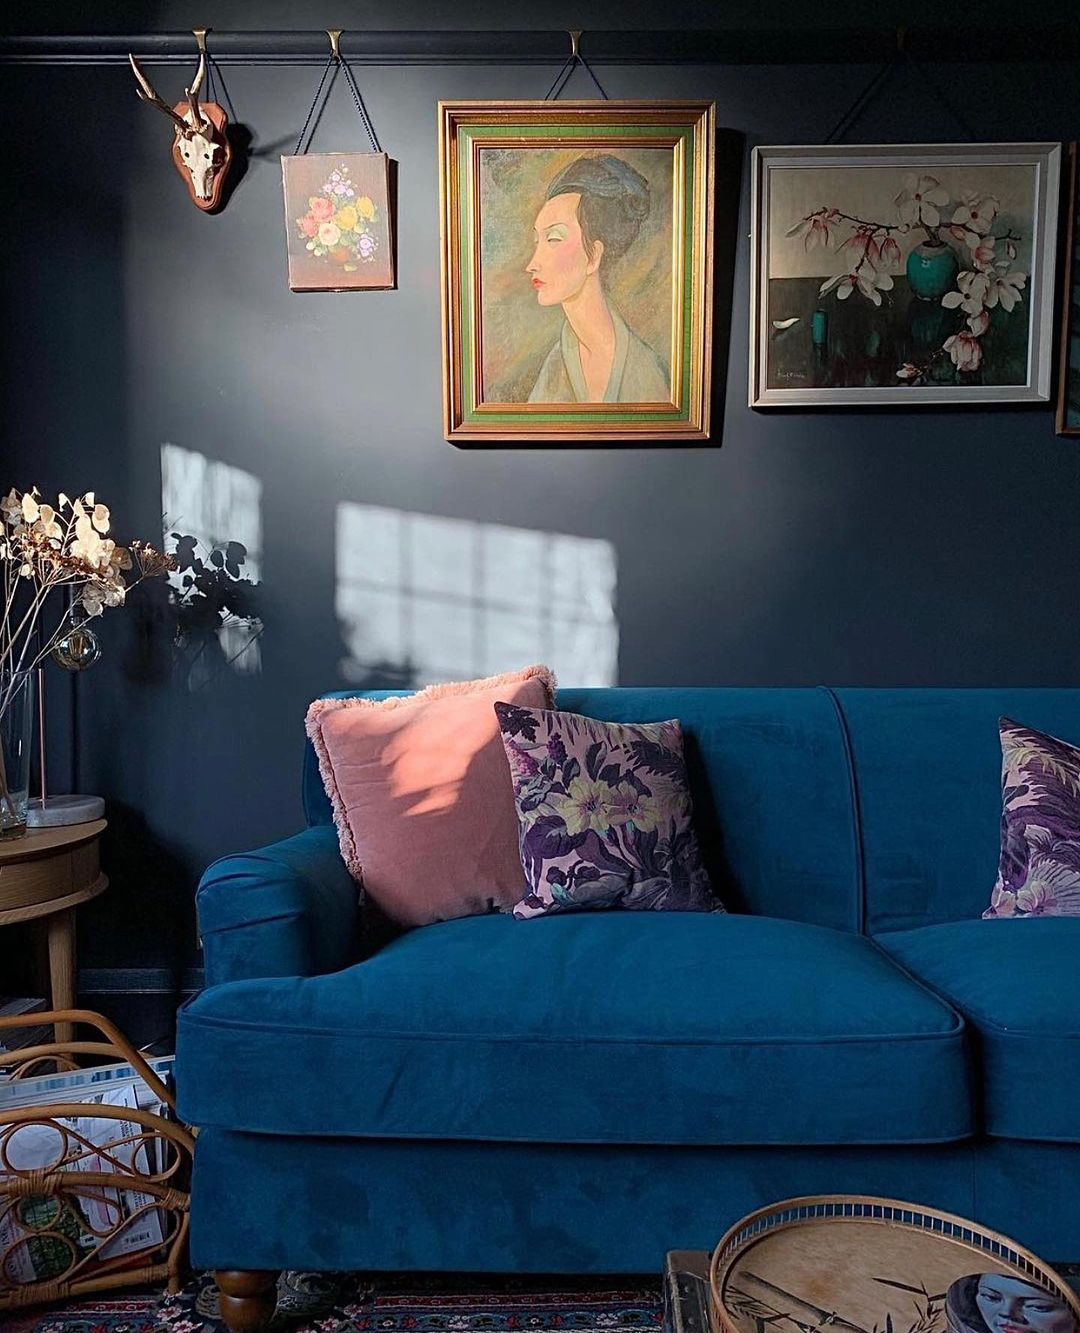 Blue Sitting Room with Art Hung on the Wall. Photo by Instagram user @solidandpattern